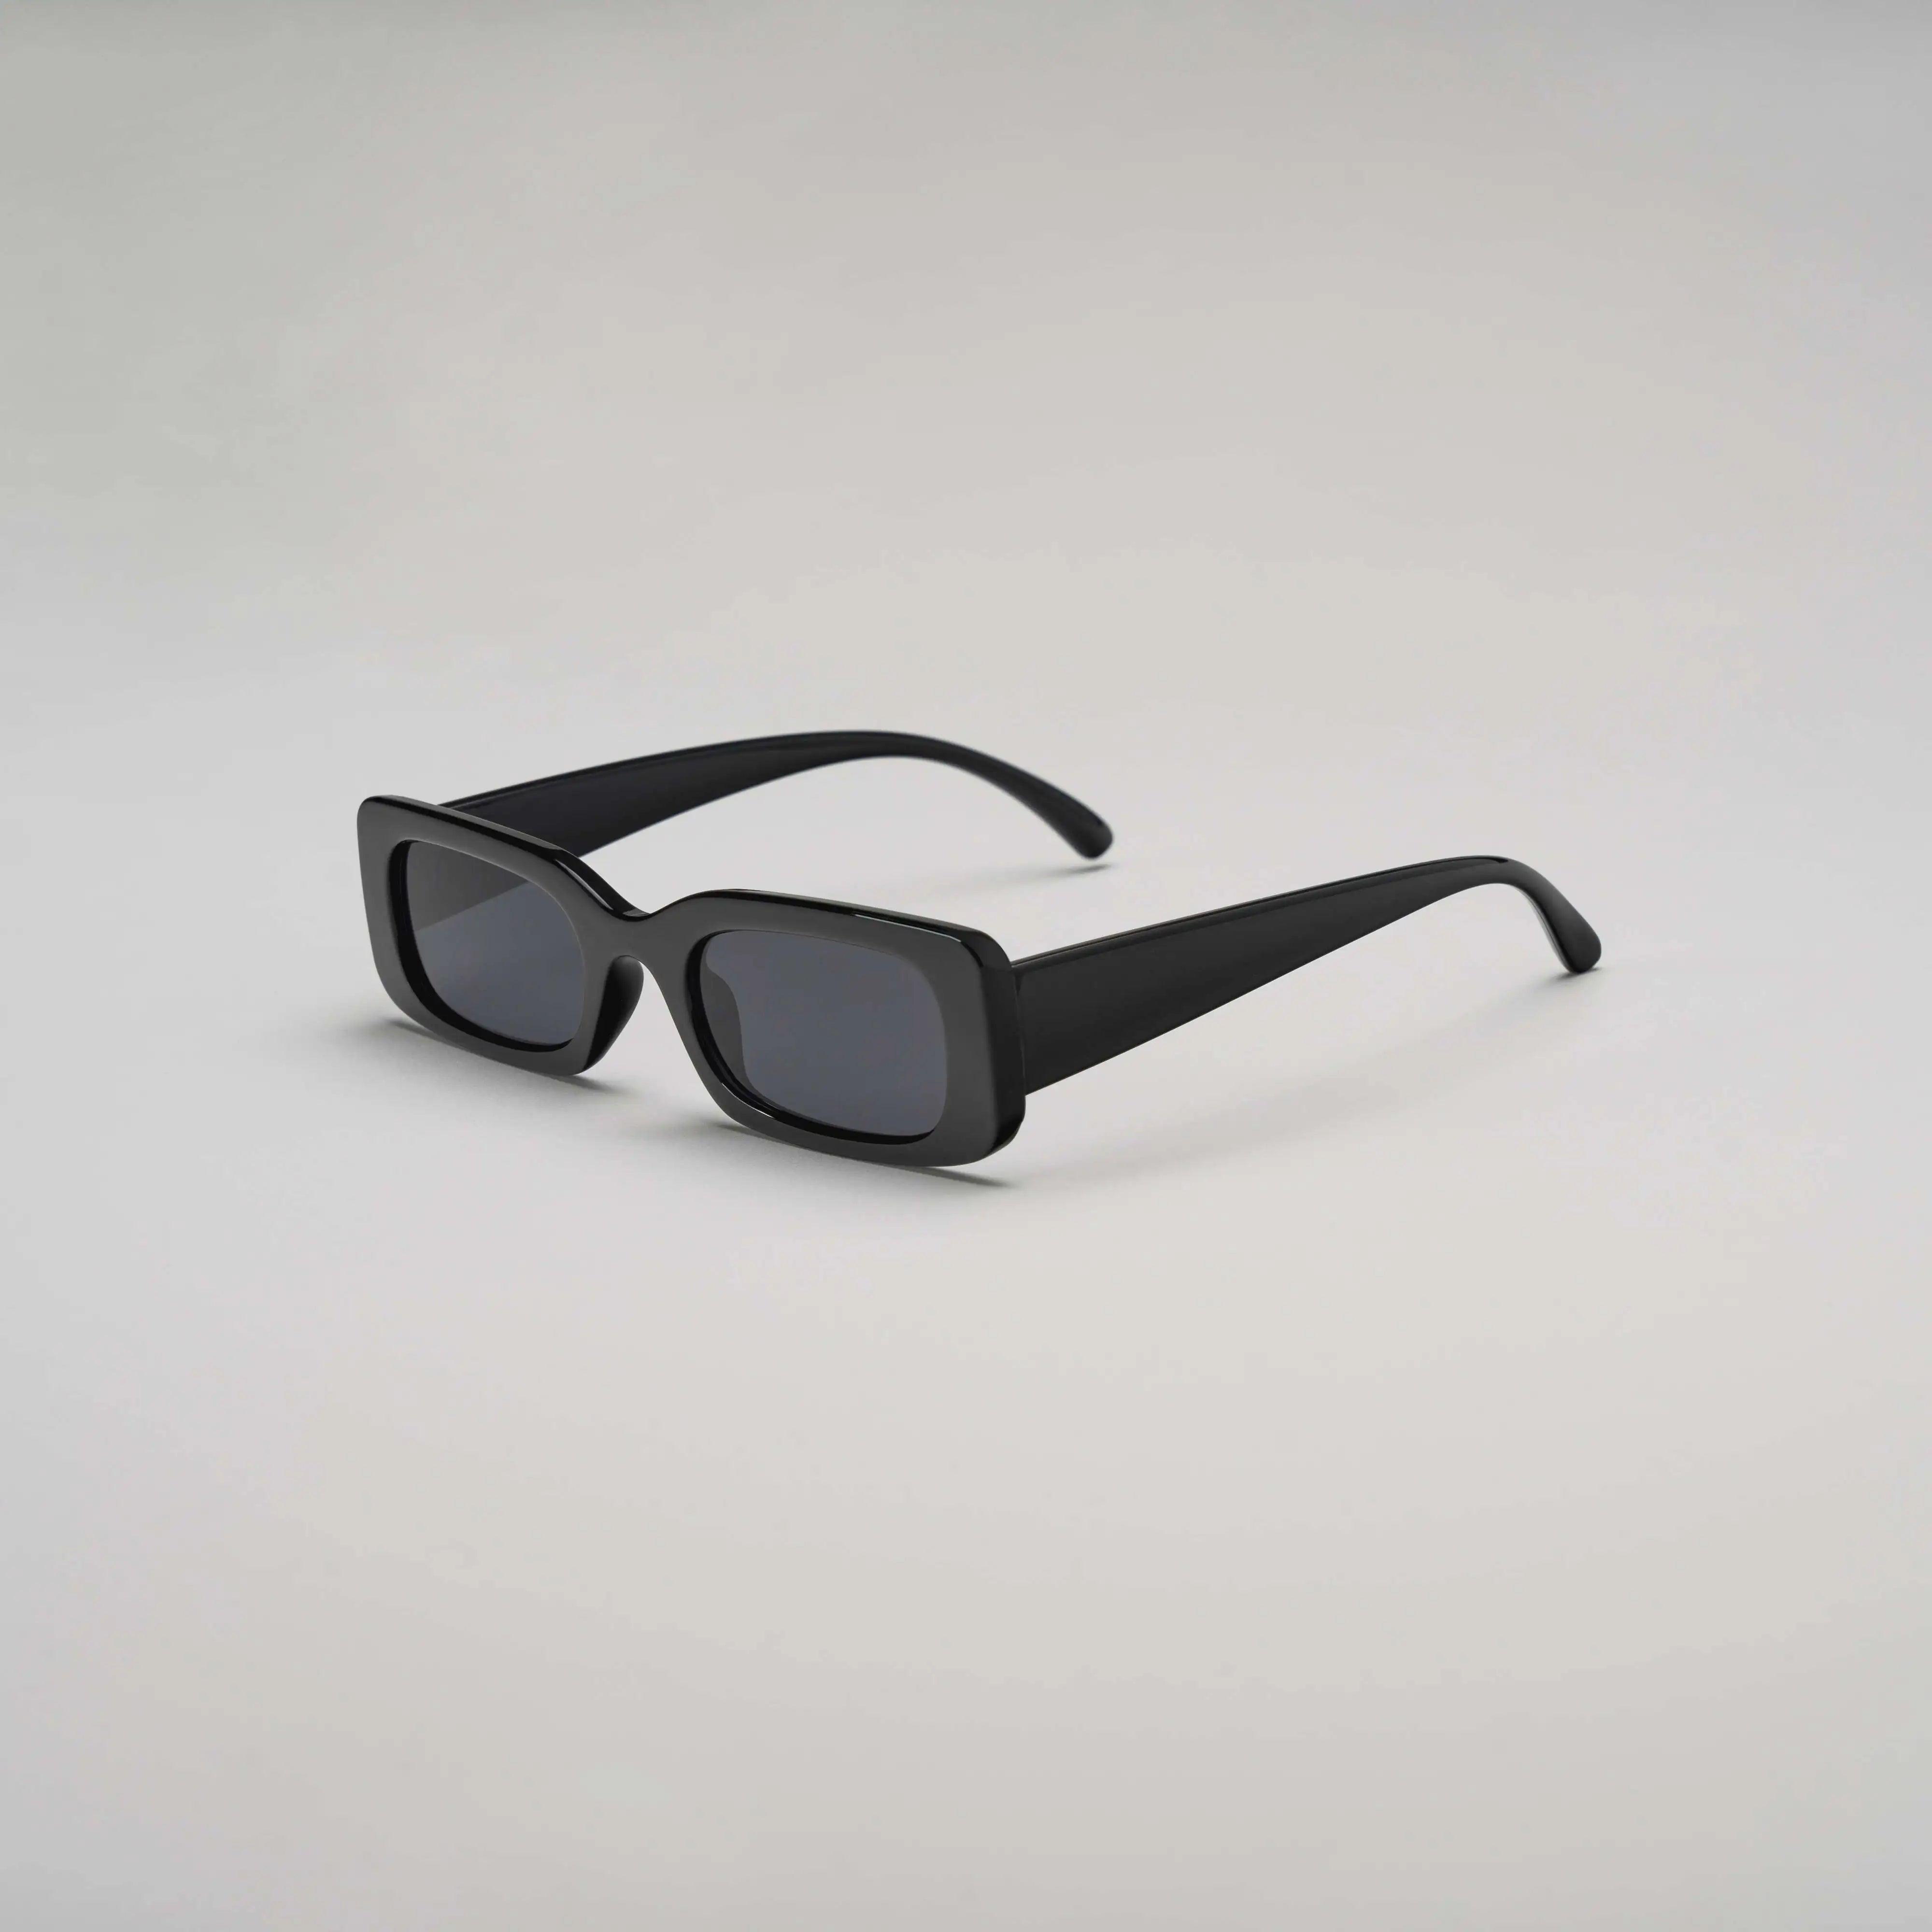 'Headliners' Oval In Black 100% UV Protection